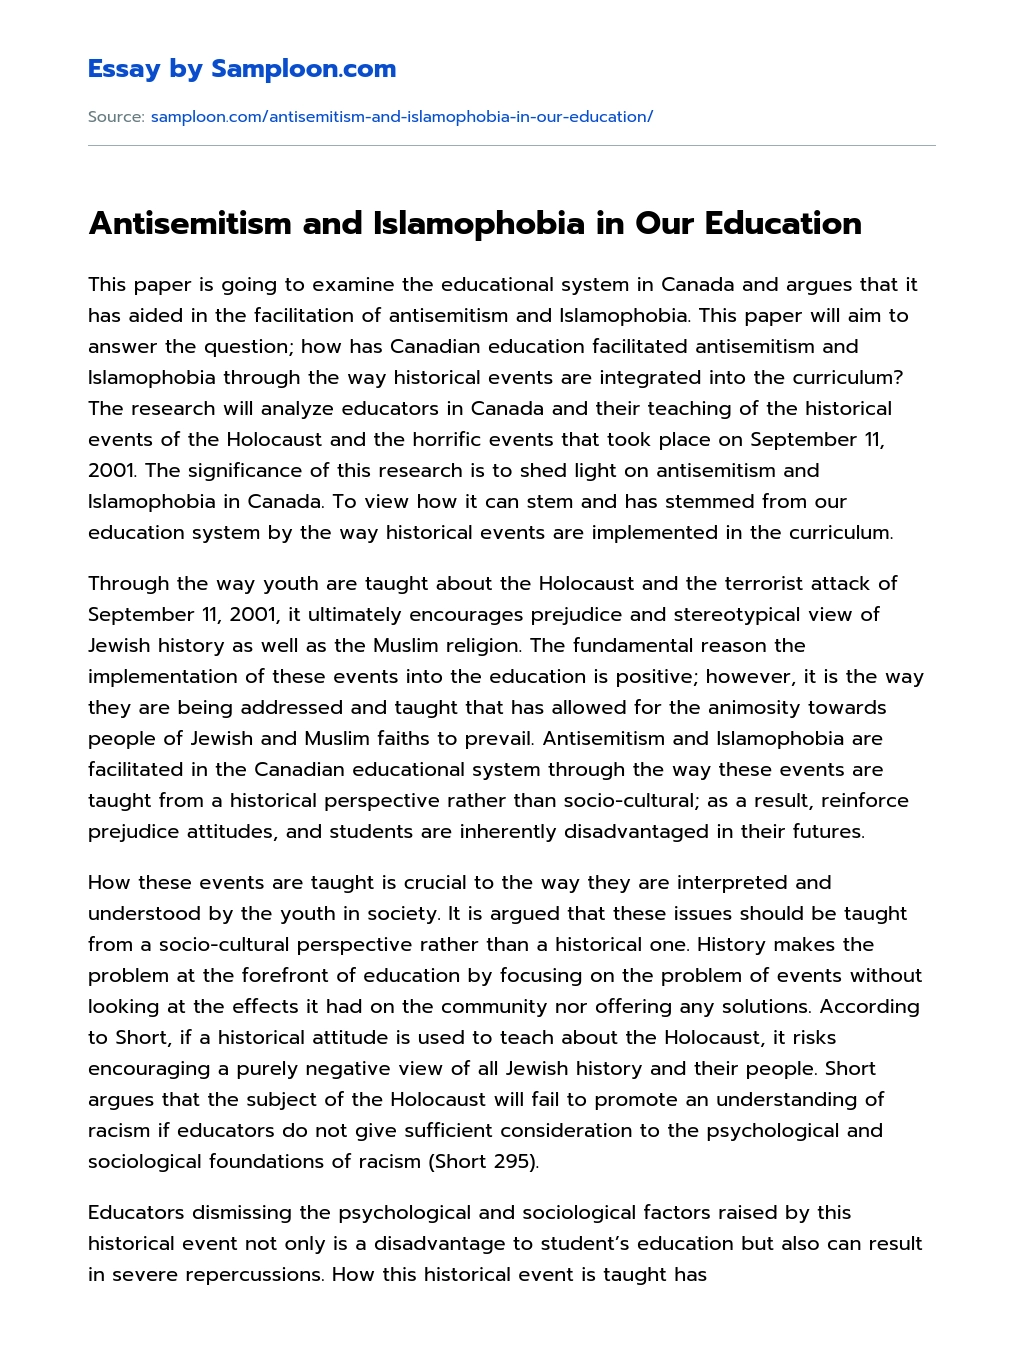 Antisemitism and Islamophobia in Our Education essay